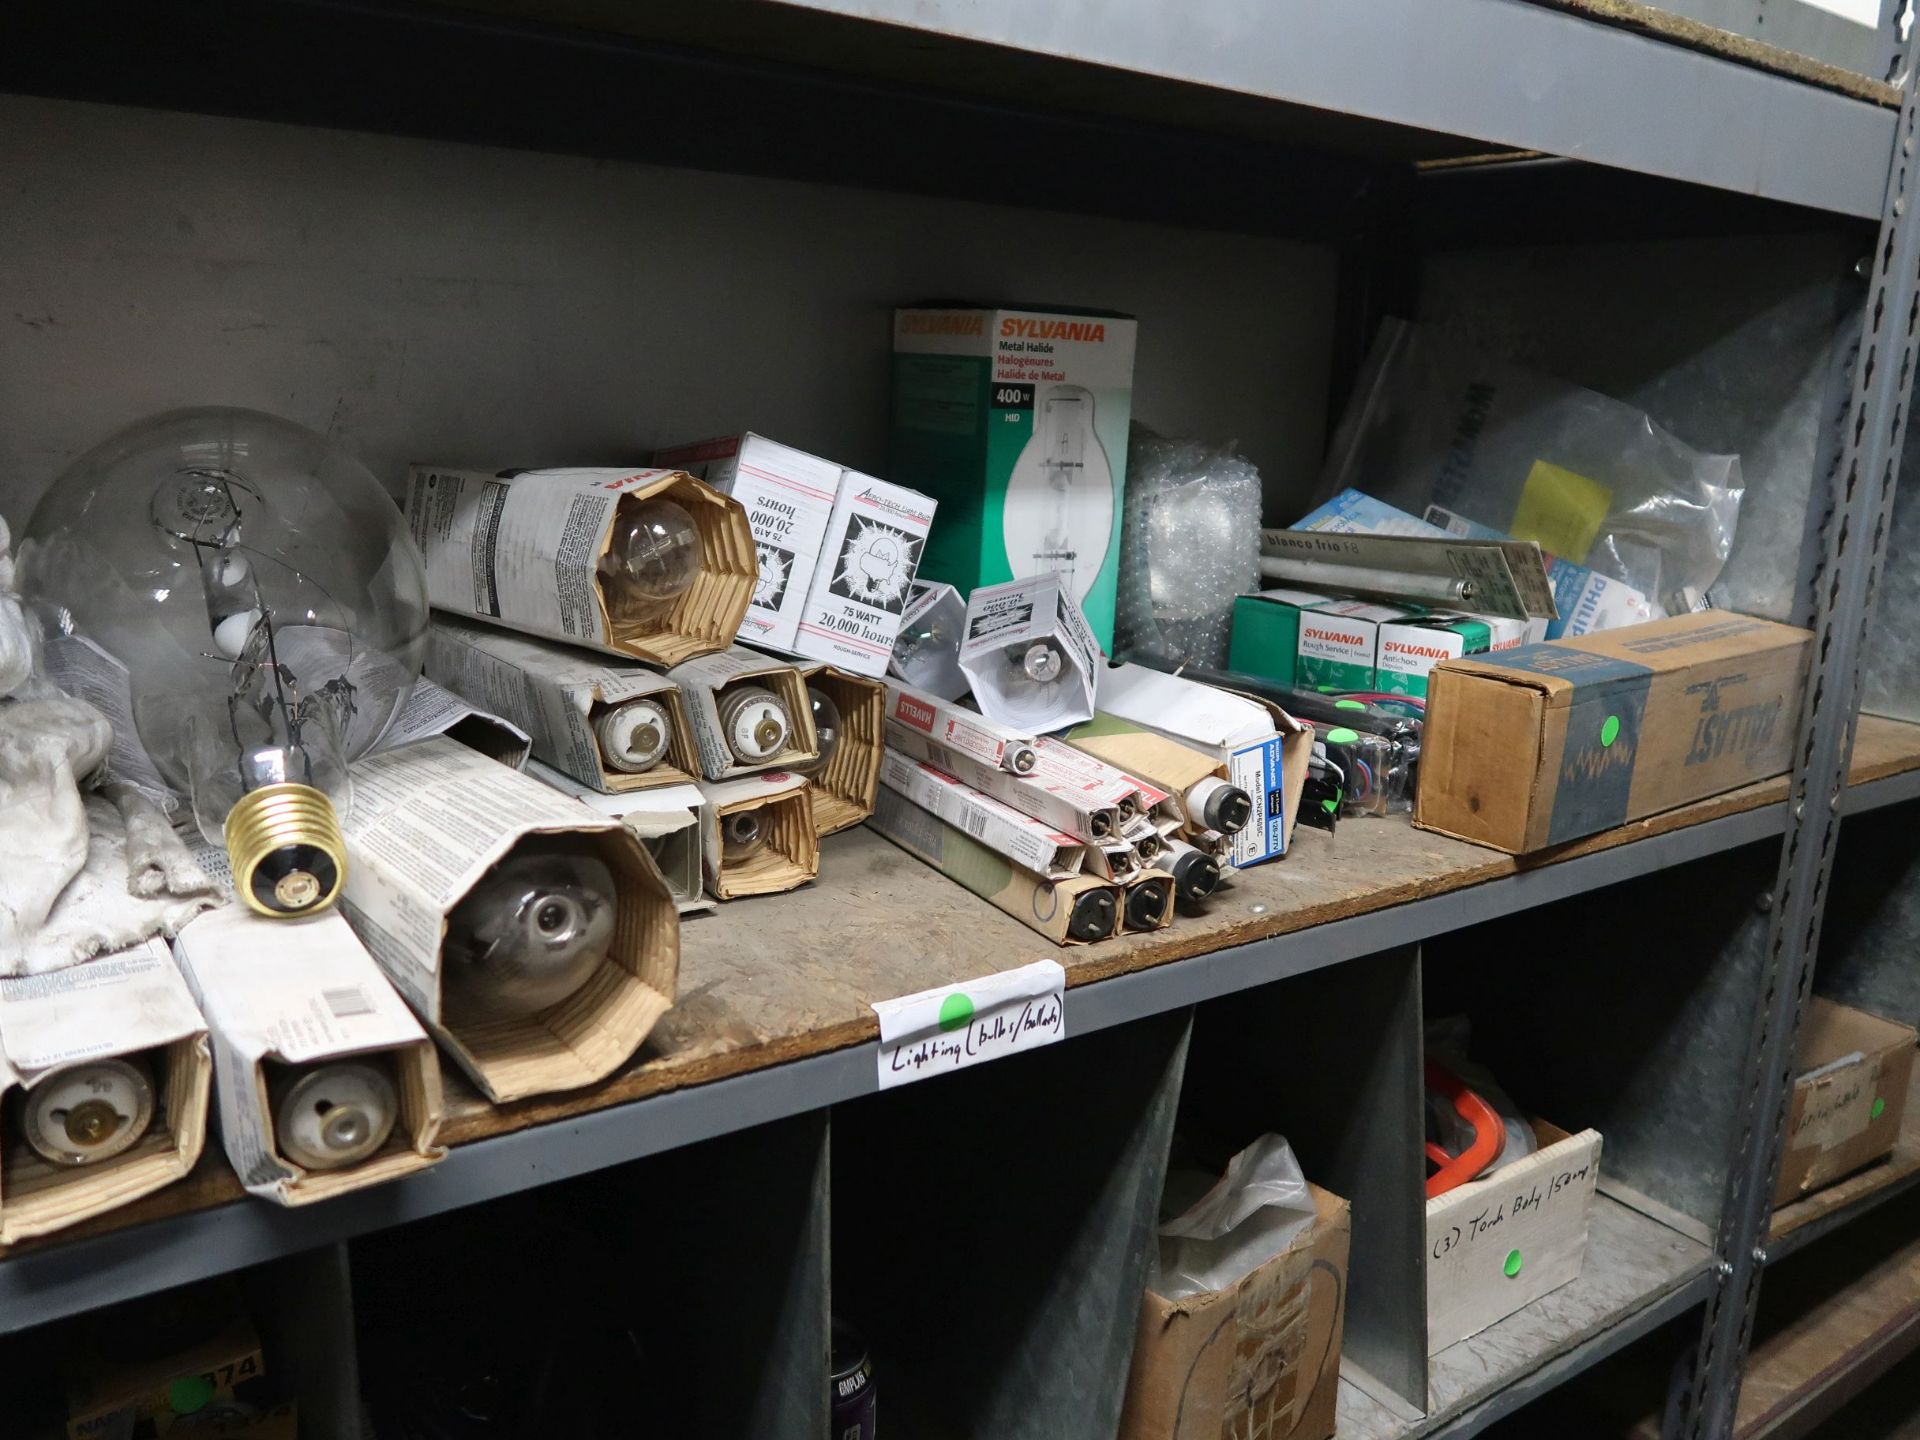 (LOT) CONTENTS ONLY ON (4) SECTIONS STEEL SHELVING MISCELLANEOUS ELECTRICAL, PNEUMATIC REGULATORS - Image 2 of 4